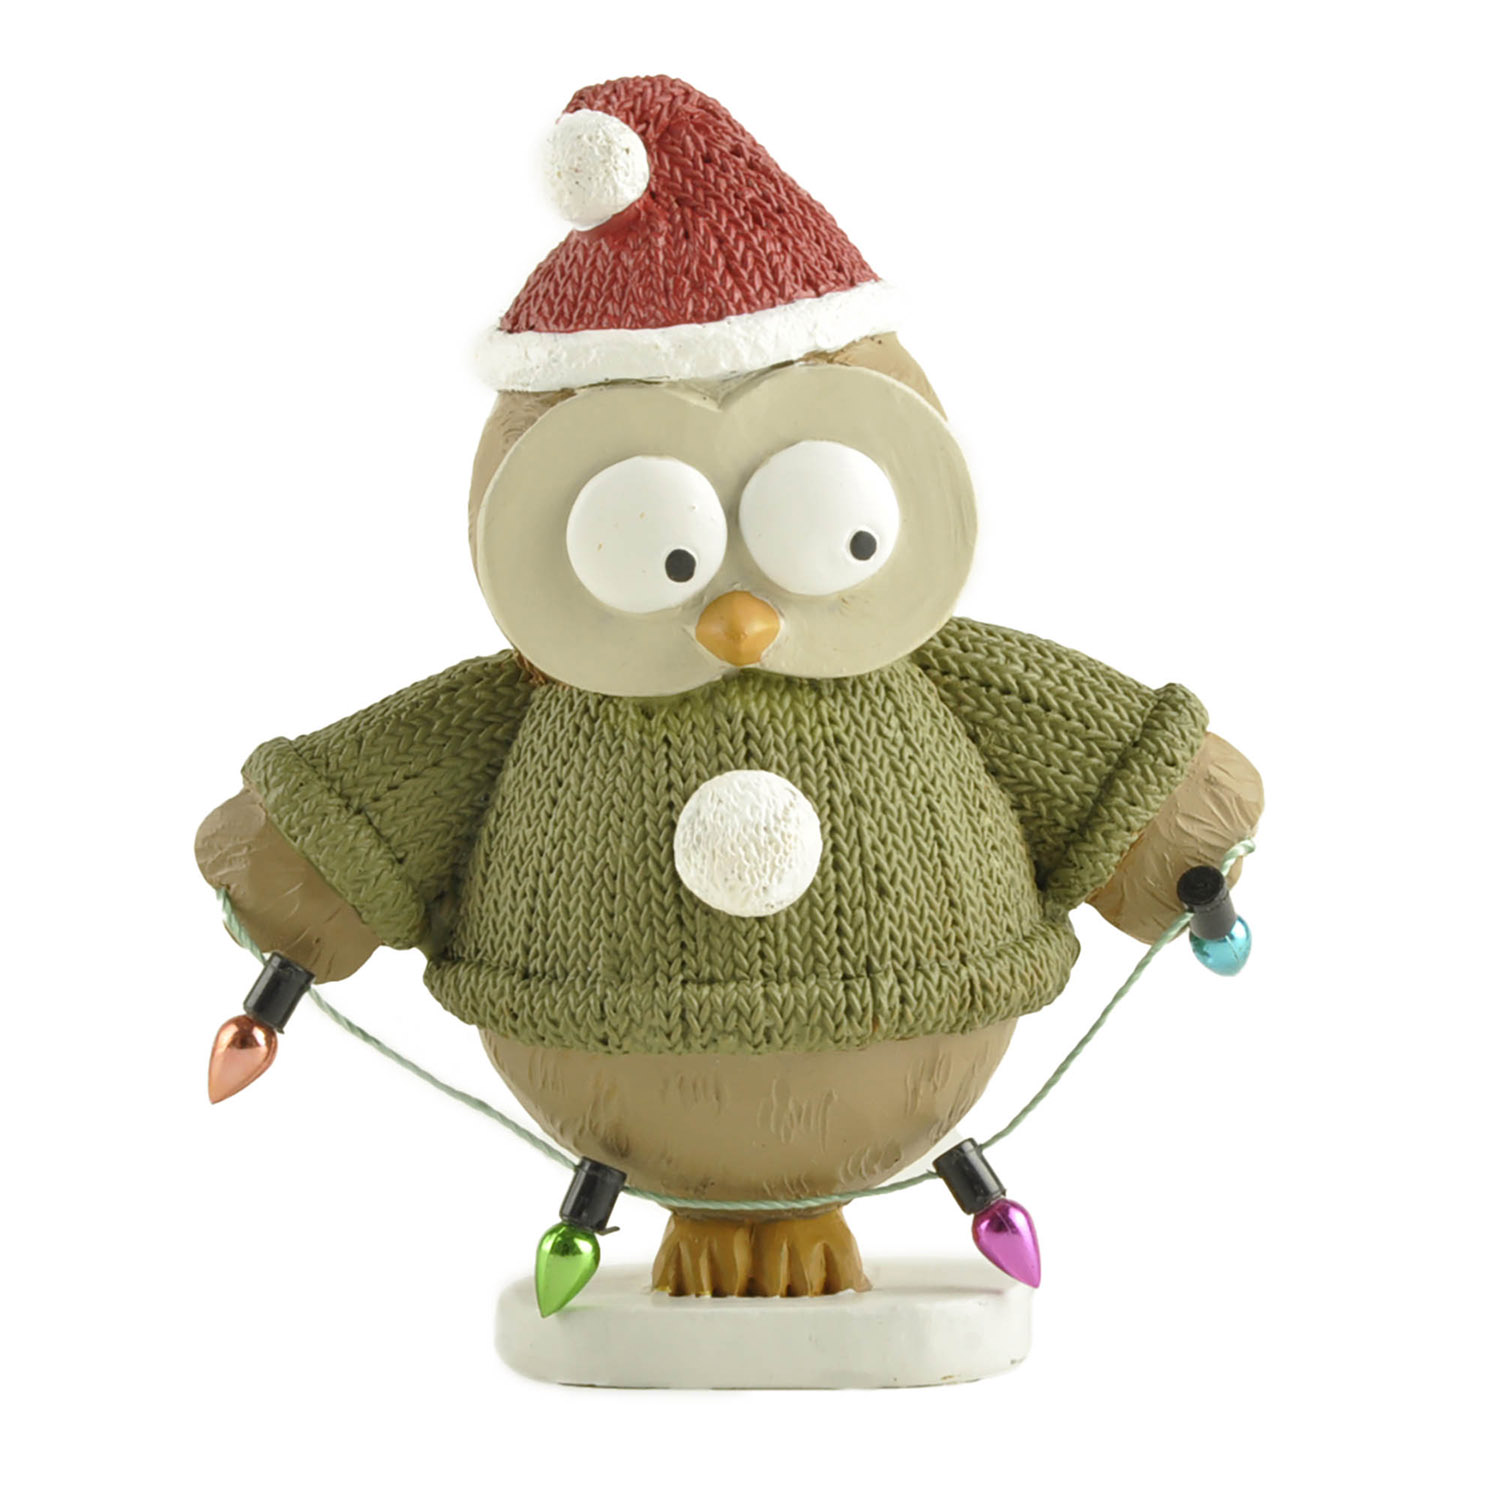 Festive Resin Owl w Santa Cap Holding String of Christmas Lights – Adorable Holiday Decoration for Home and Office 238-13897